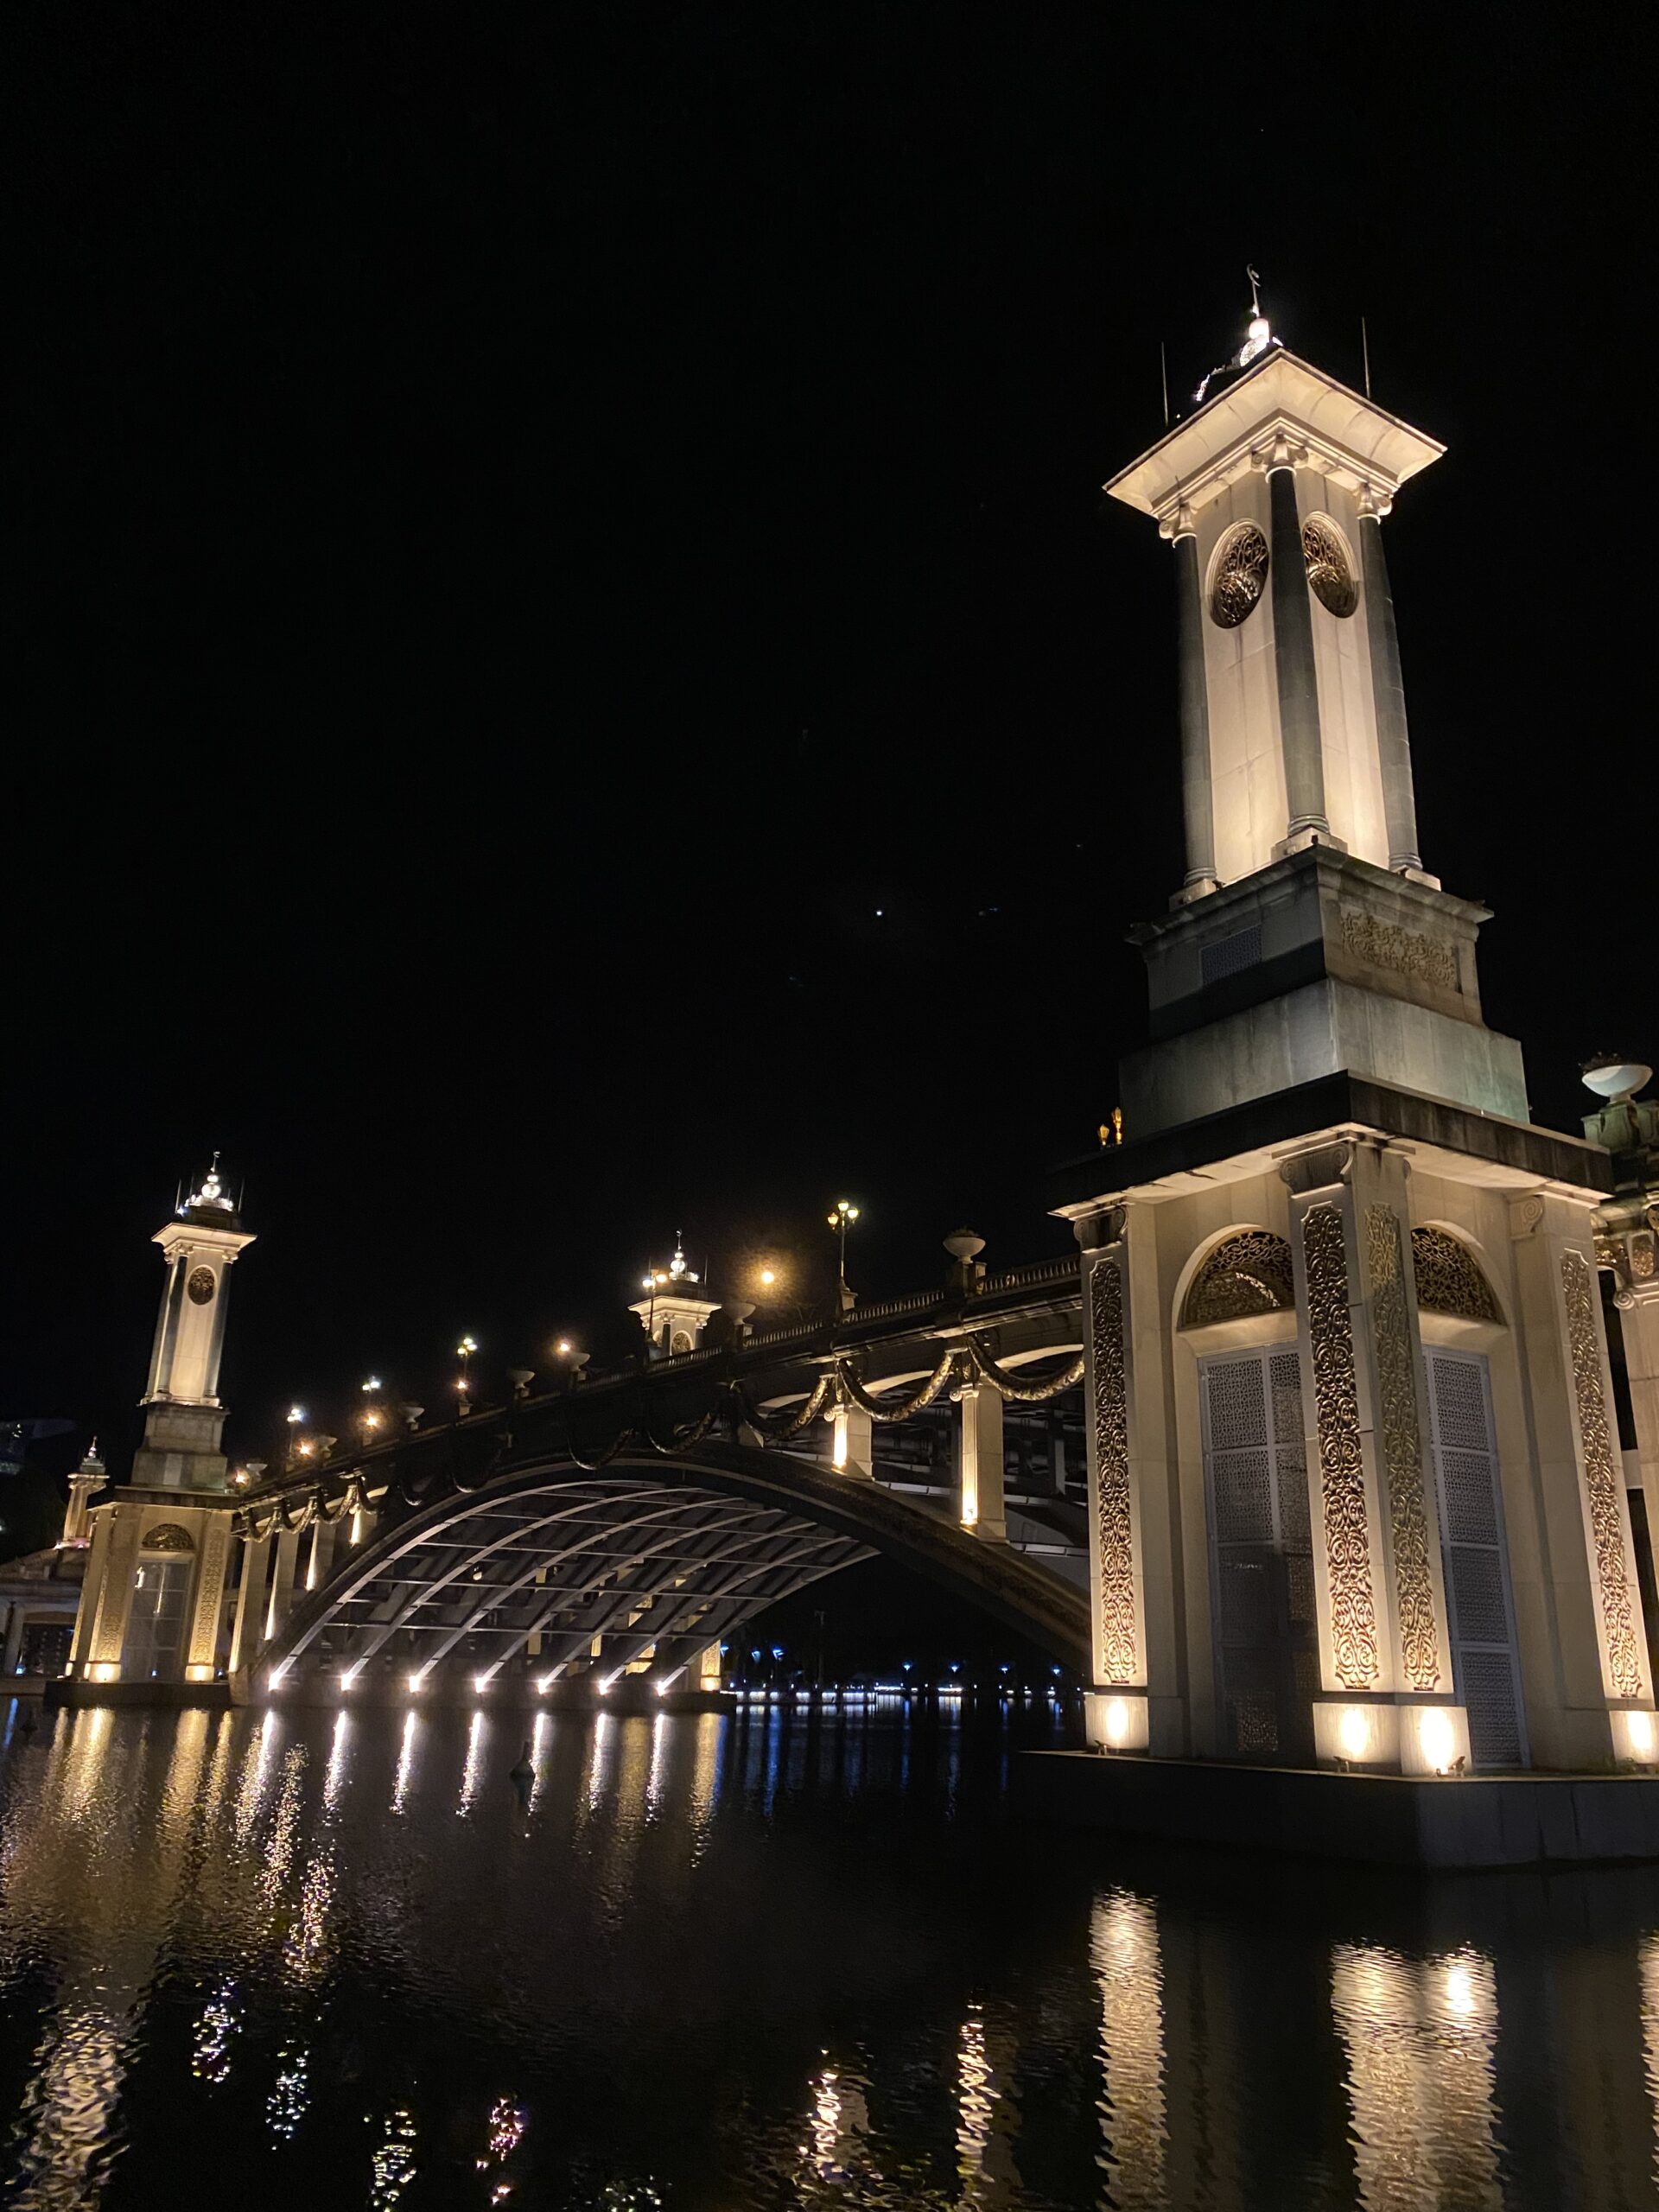 Seri gemilang bridge here are 4 spots in the klang valley for your next ootd photoshoot session!